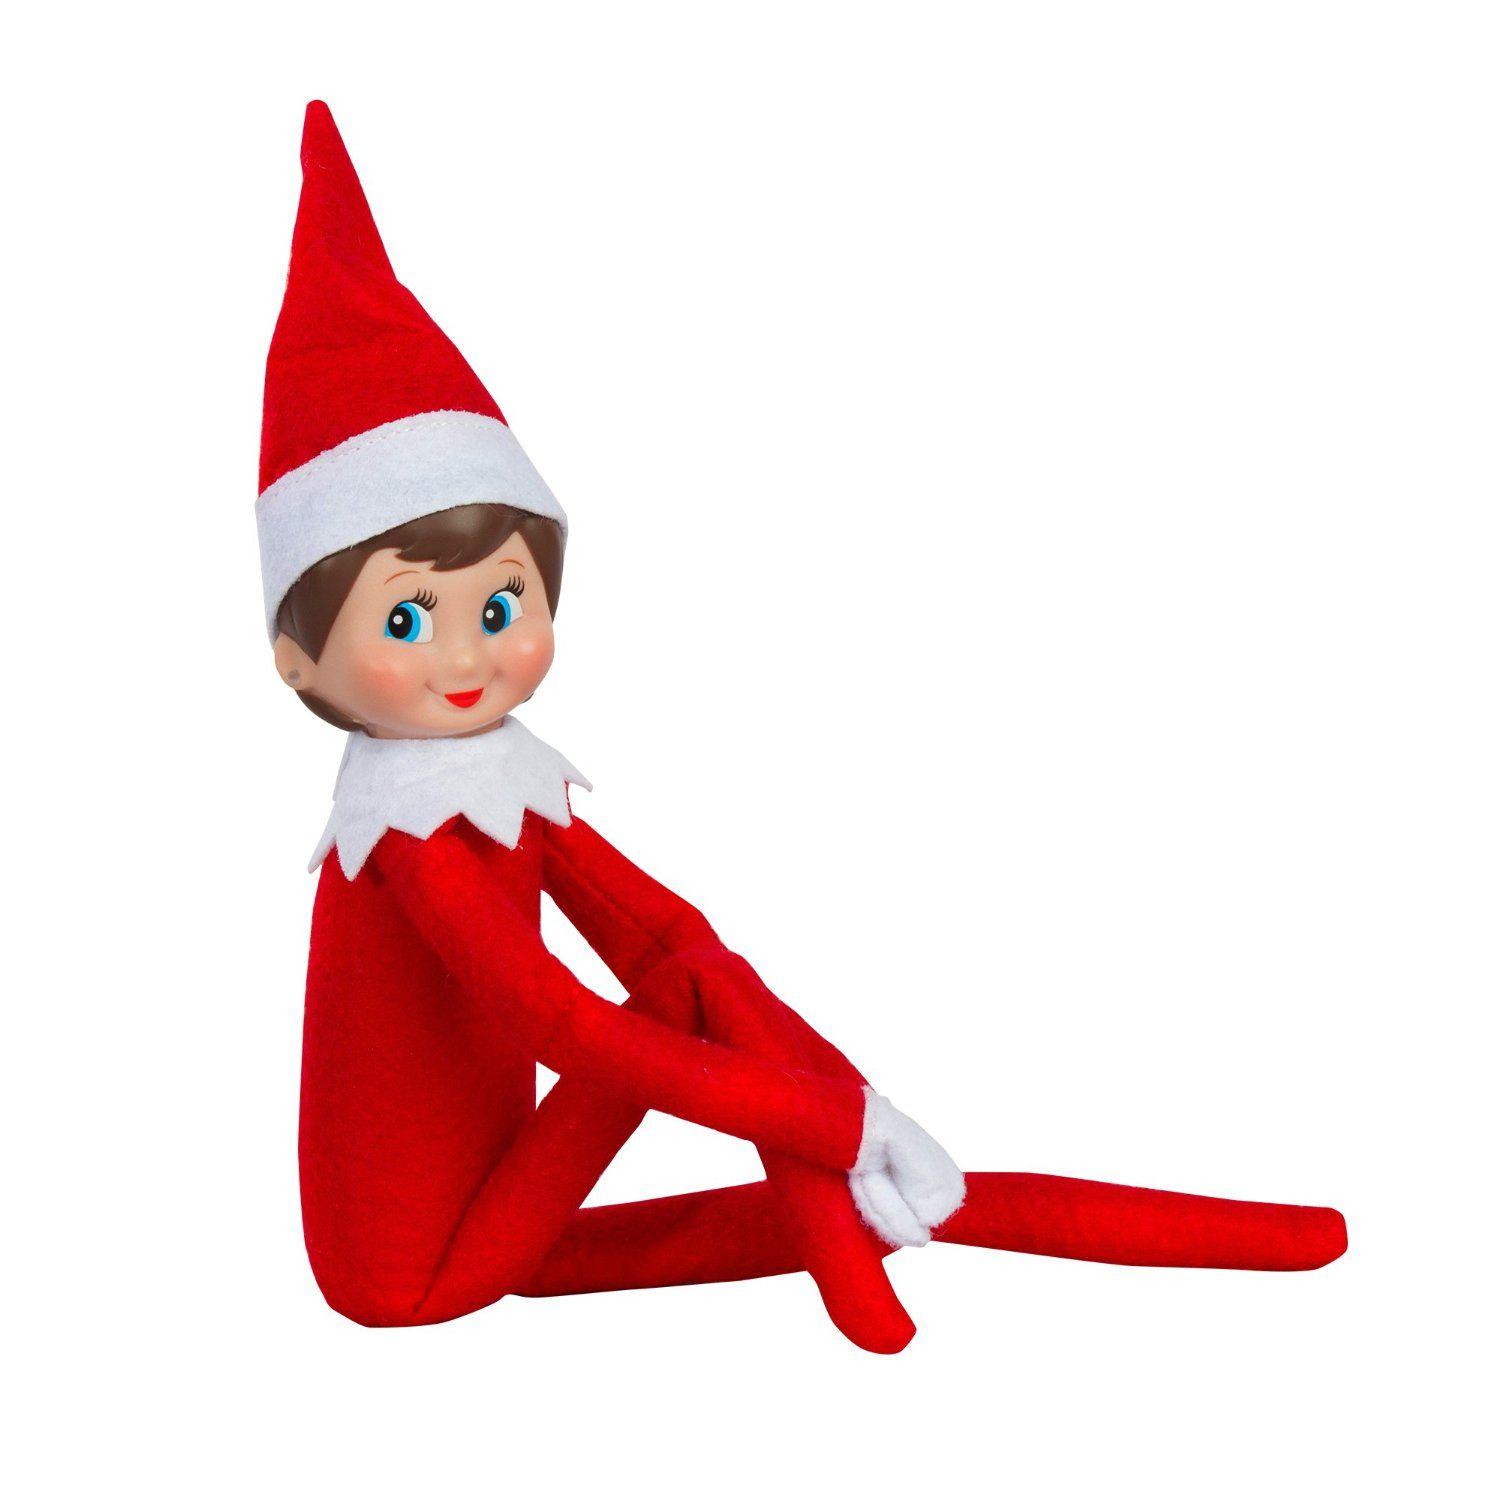 Elf on the Shelf Phone Wallpaper  Lilies and Loafers  Elf on the shelf  Christmas wallpaper Elf